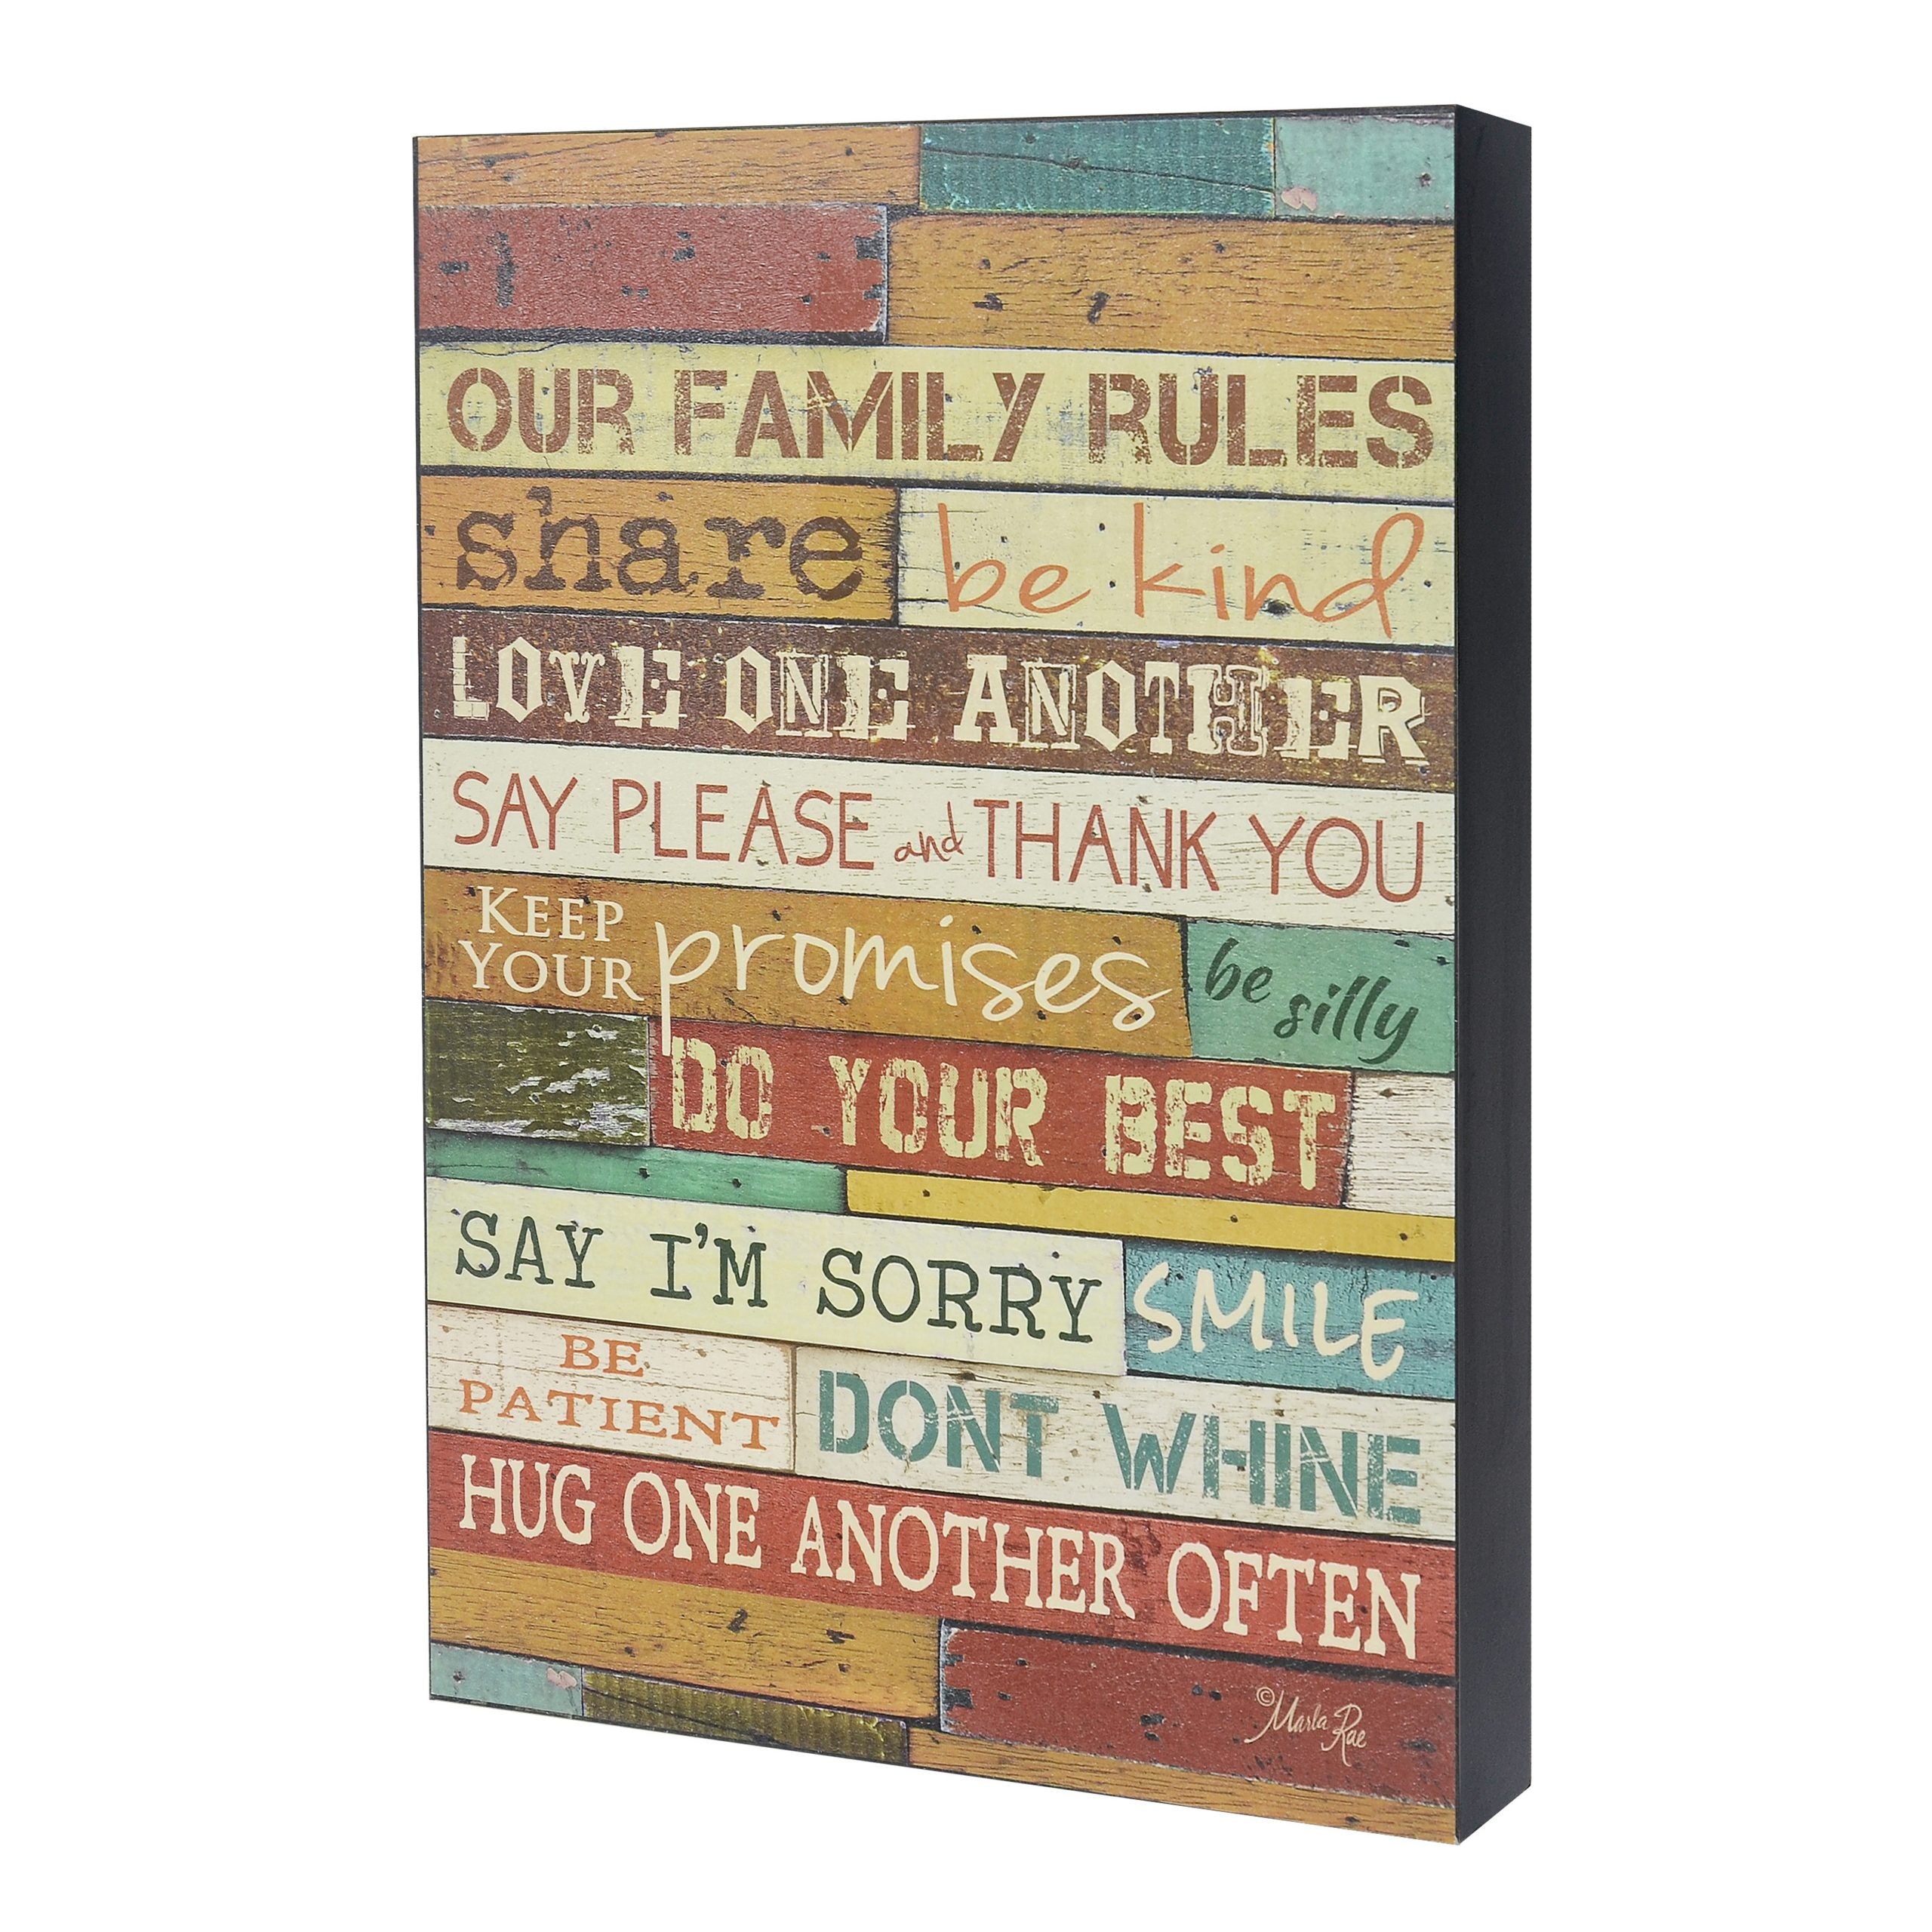 Our Family Rules – Homekor